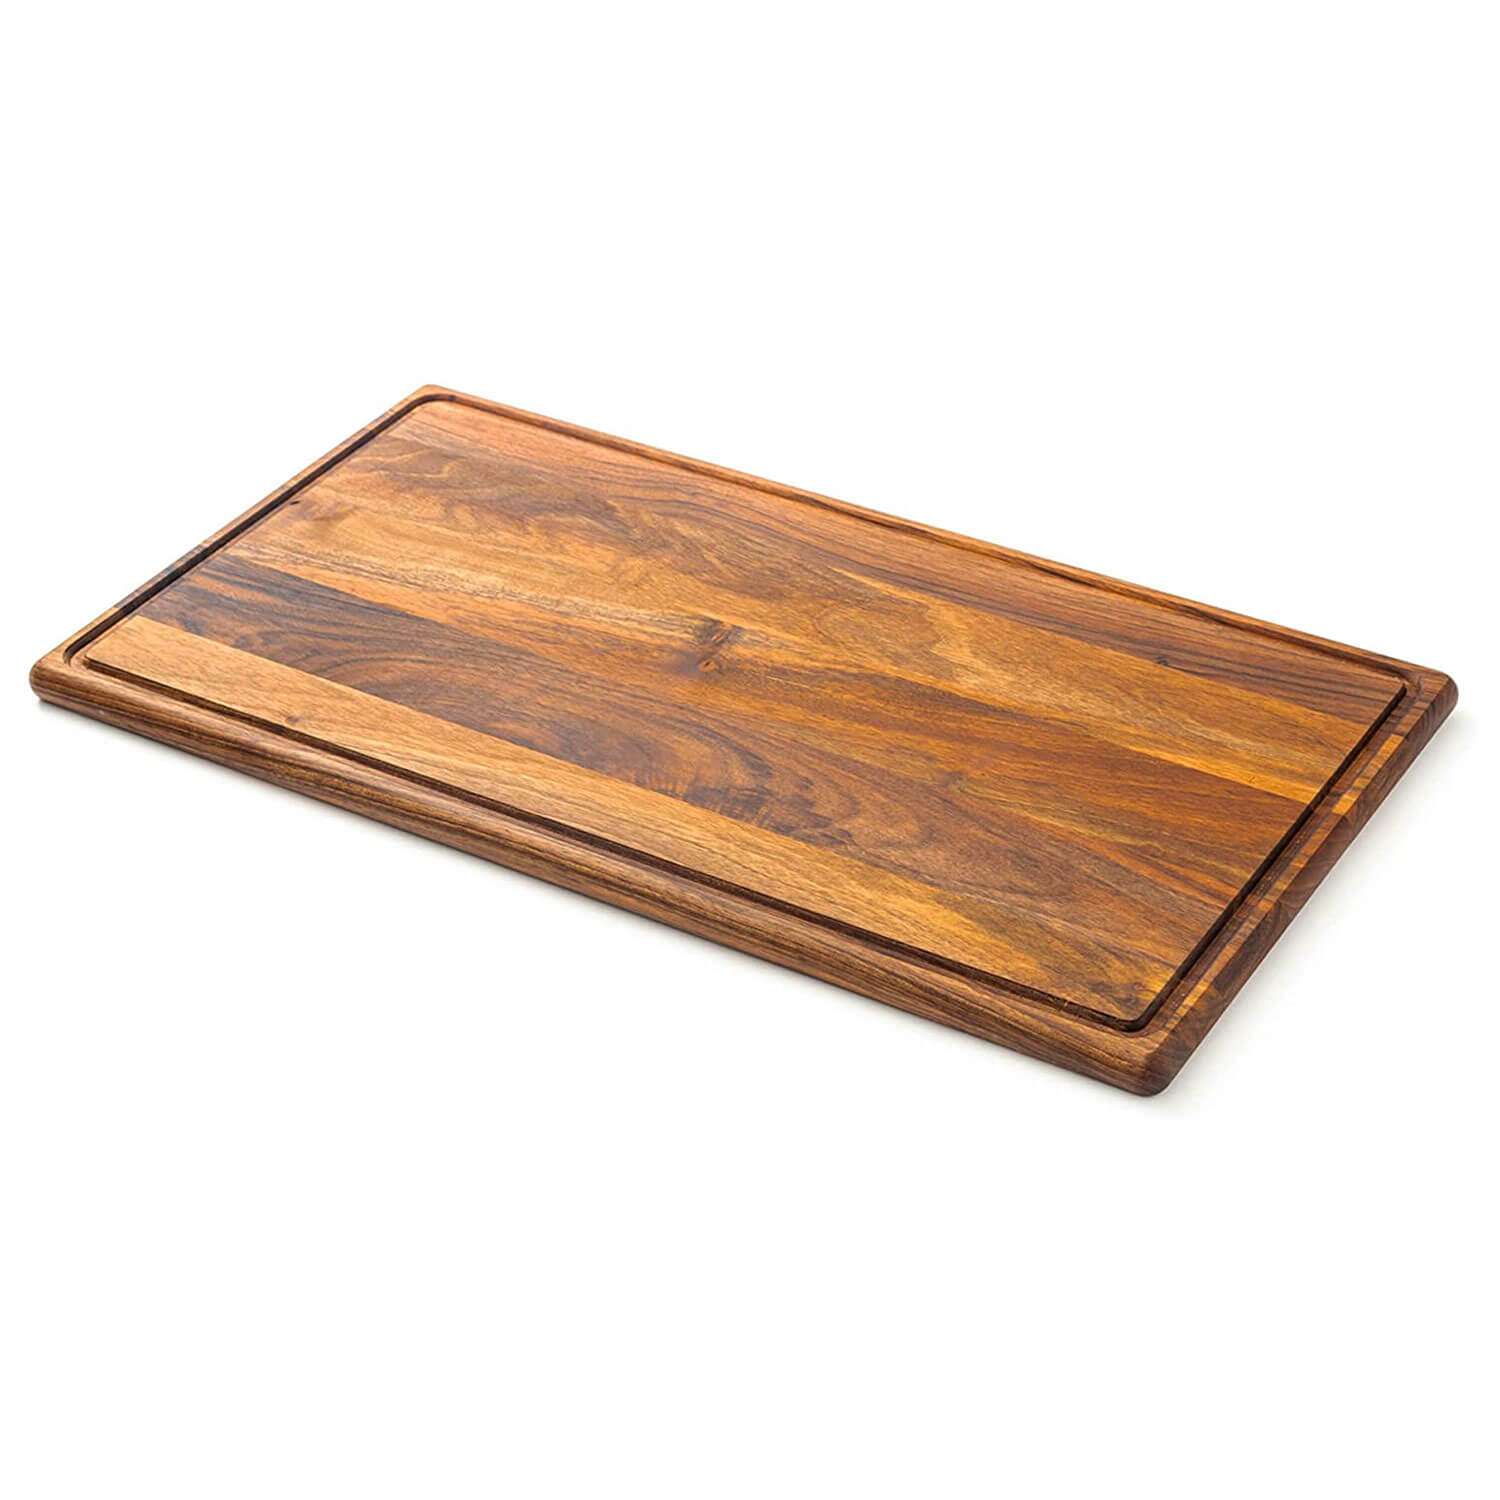 https://cdn.shopify.com/s/files/1/0515/2440/3381/products/large-wooden-cutting-board-serving-from-walnut-44-x-30-2-cm-tuuli-kitchen-786.jpg